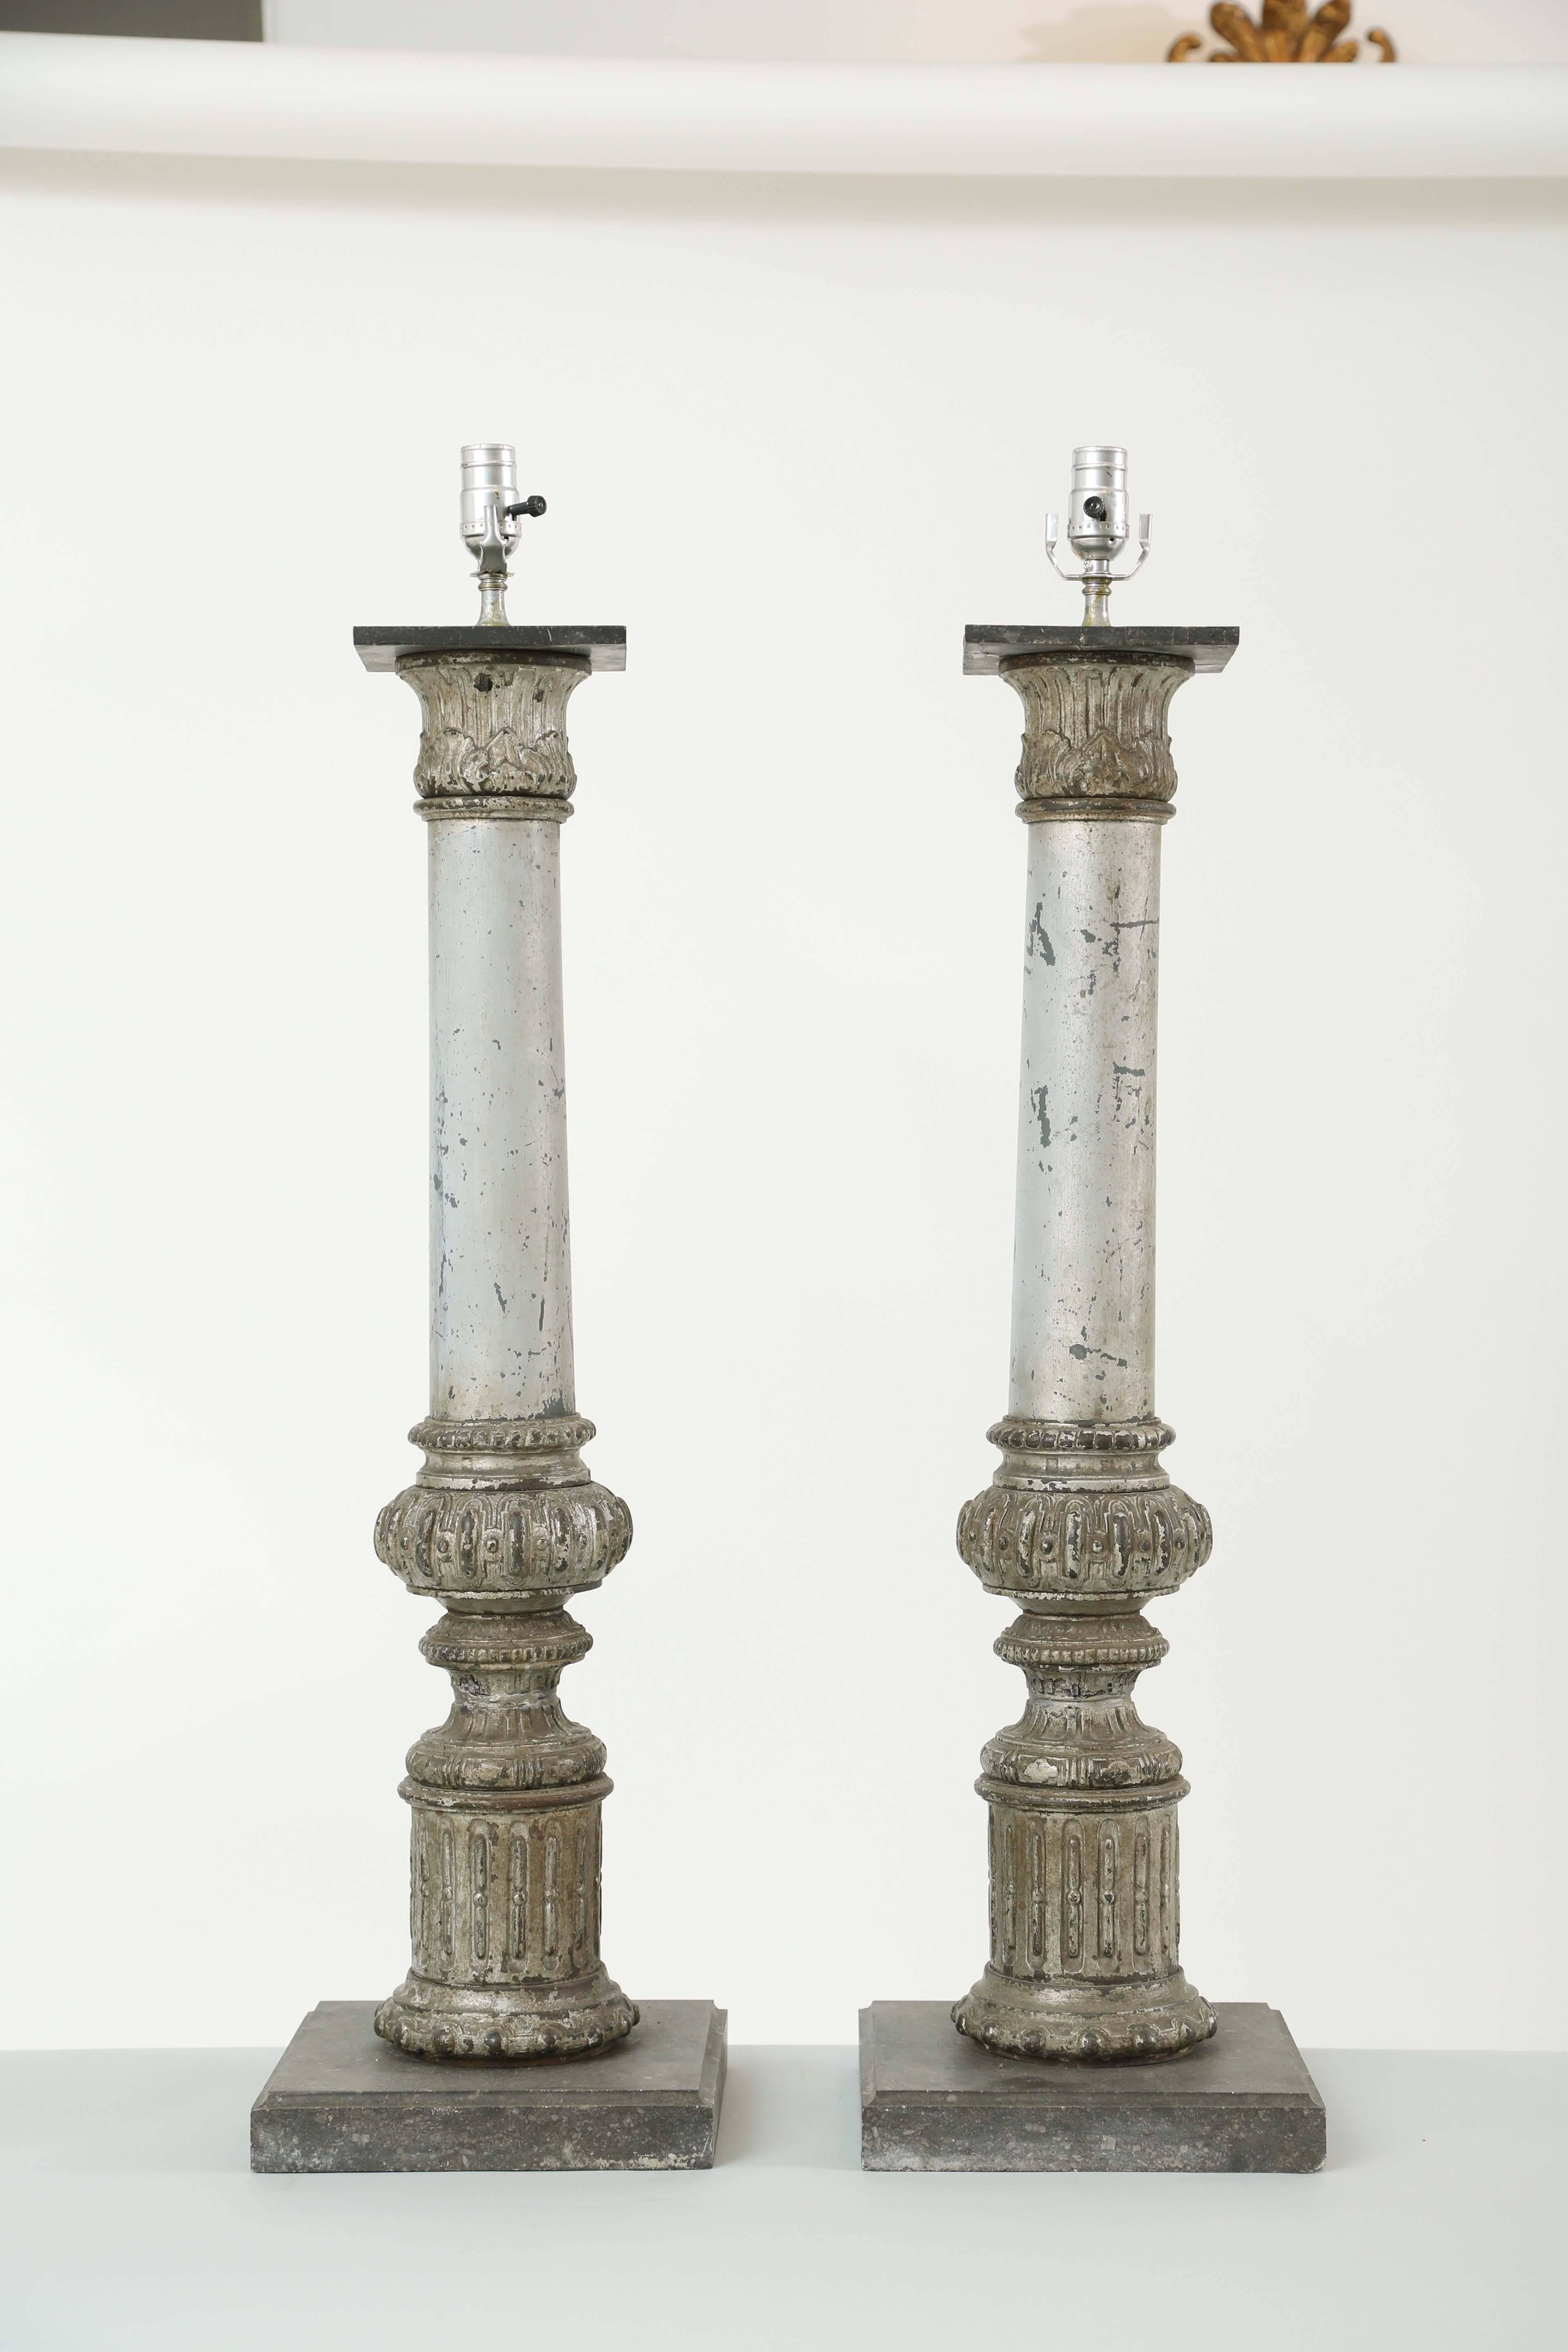 Pair of lamps, painted and parcel silvergilt iron, each a column with Corinthian capital, on knopped base and cylindrical fluted plinth, mounted on marble platforms.

Stock ID: D9377